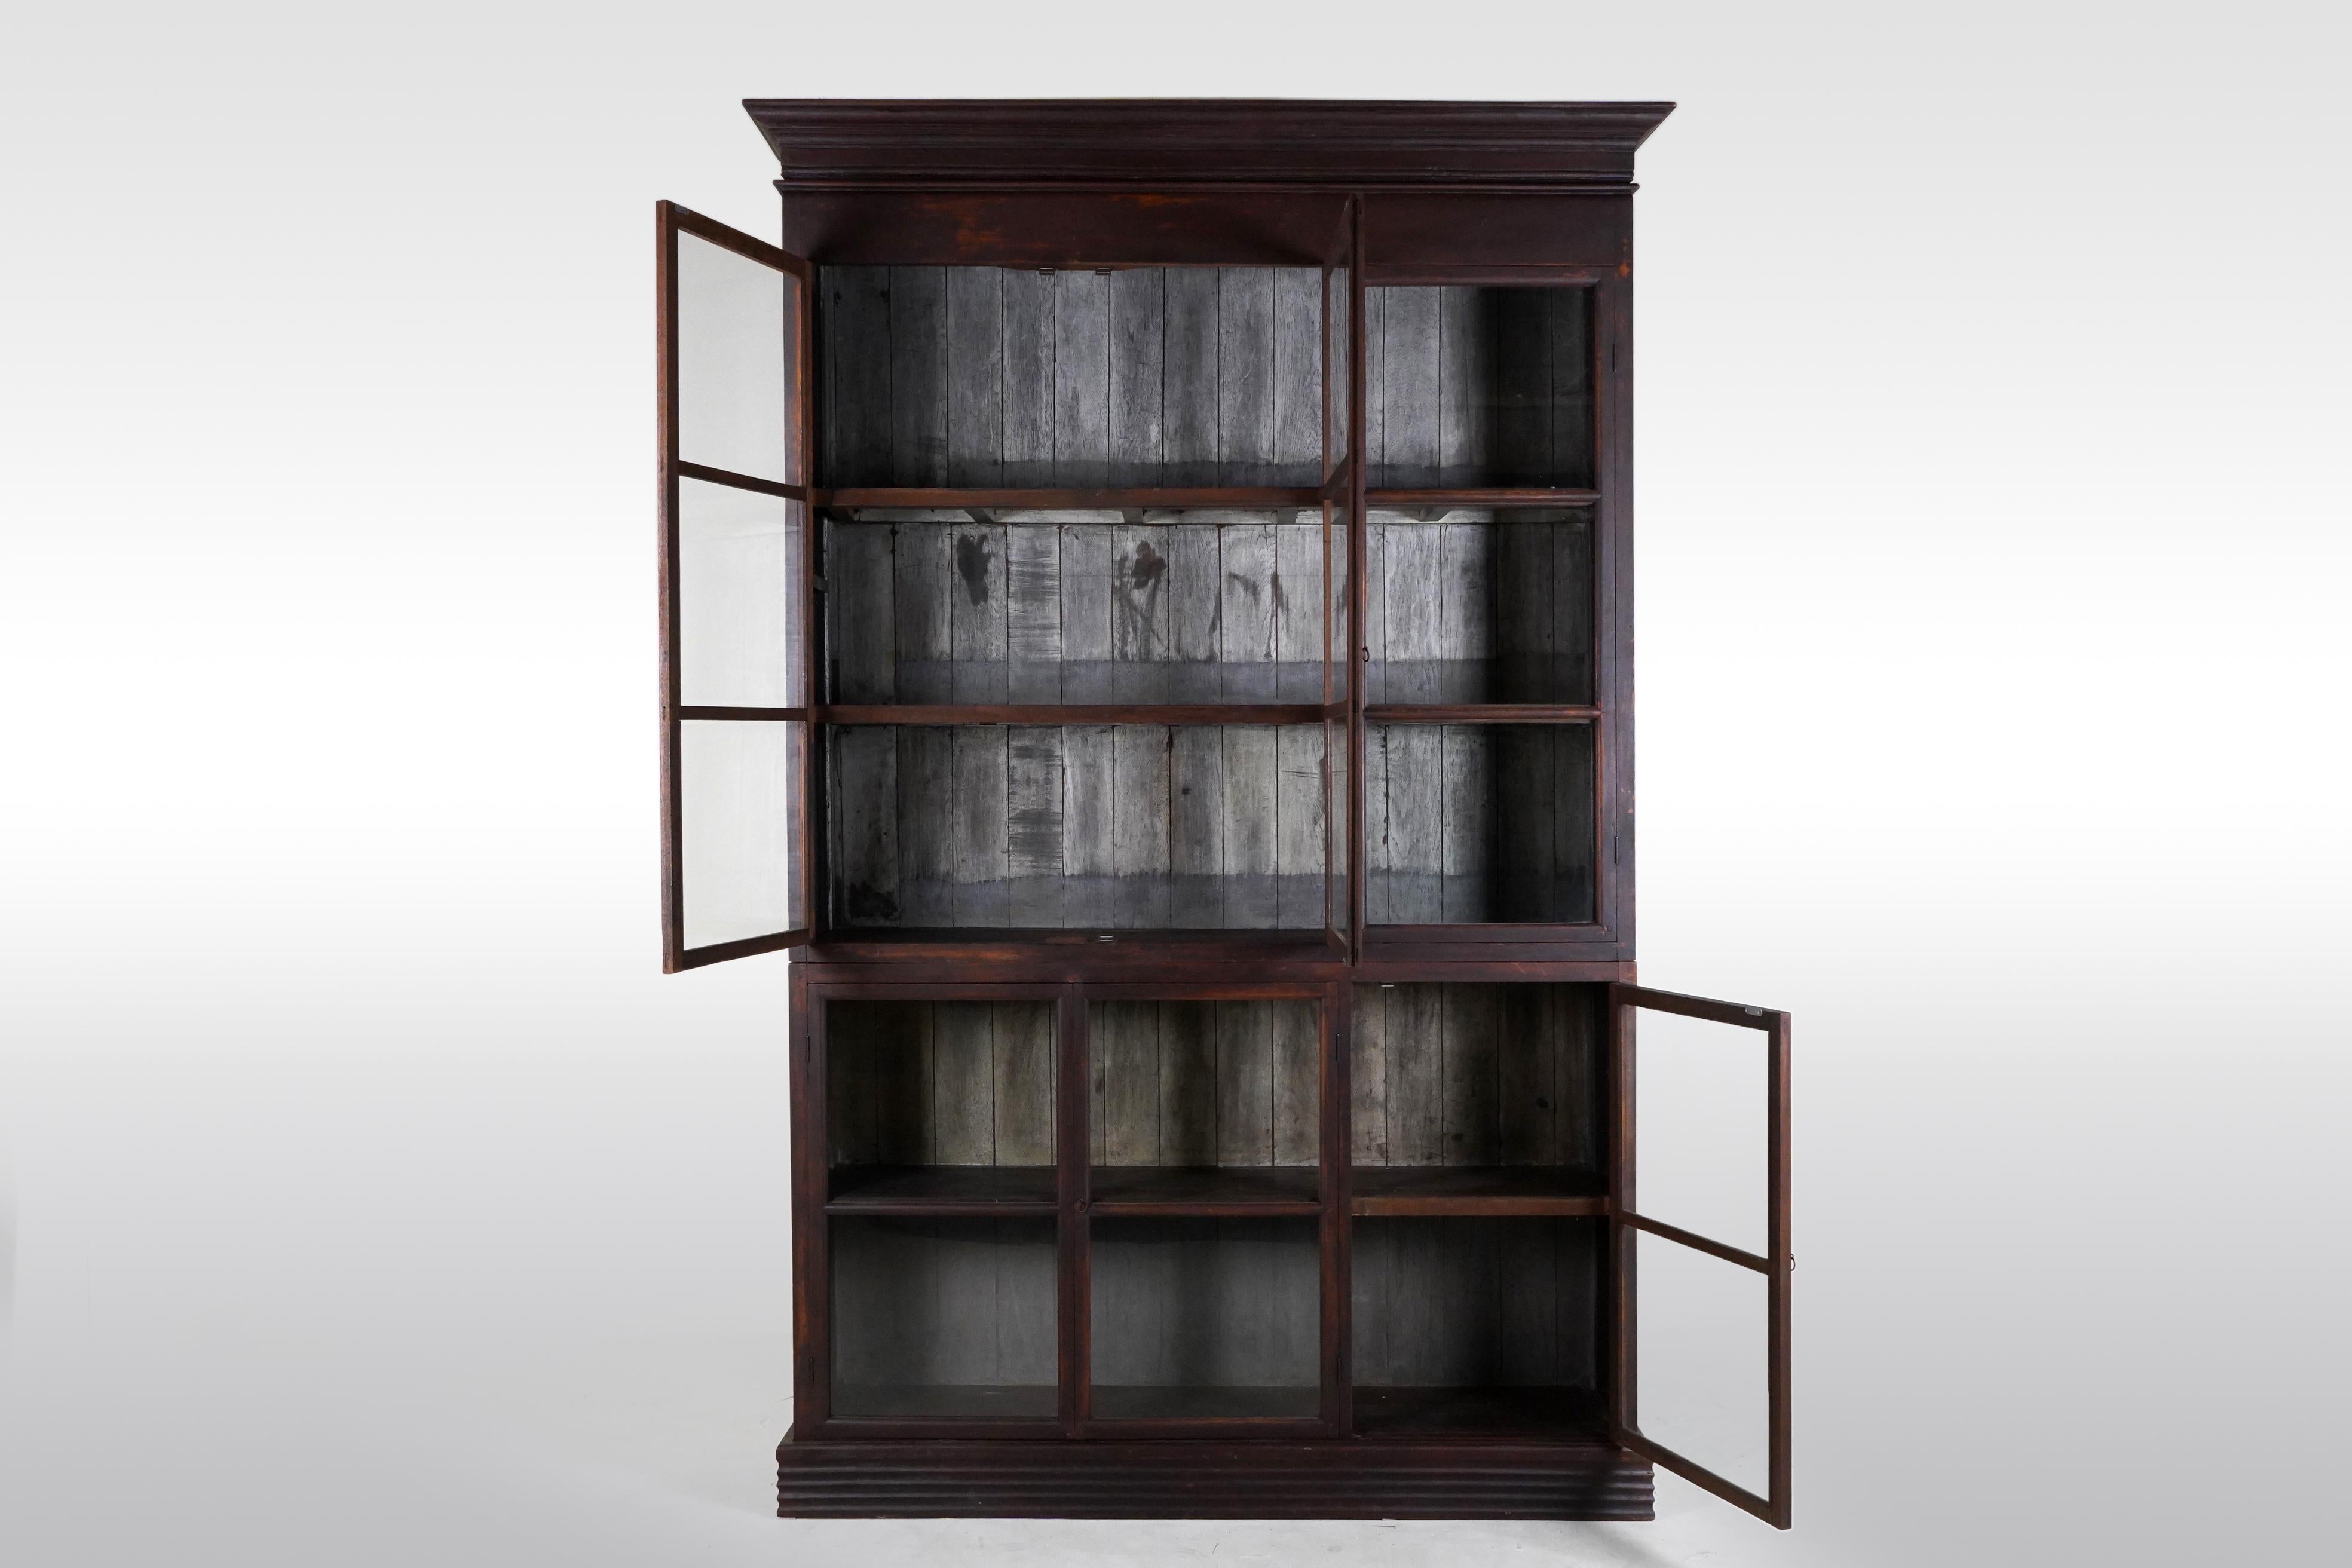 Burmese A British Colonial Teak Wood Bookcase For Sale